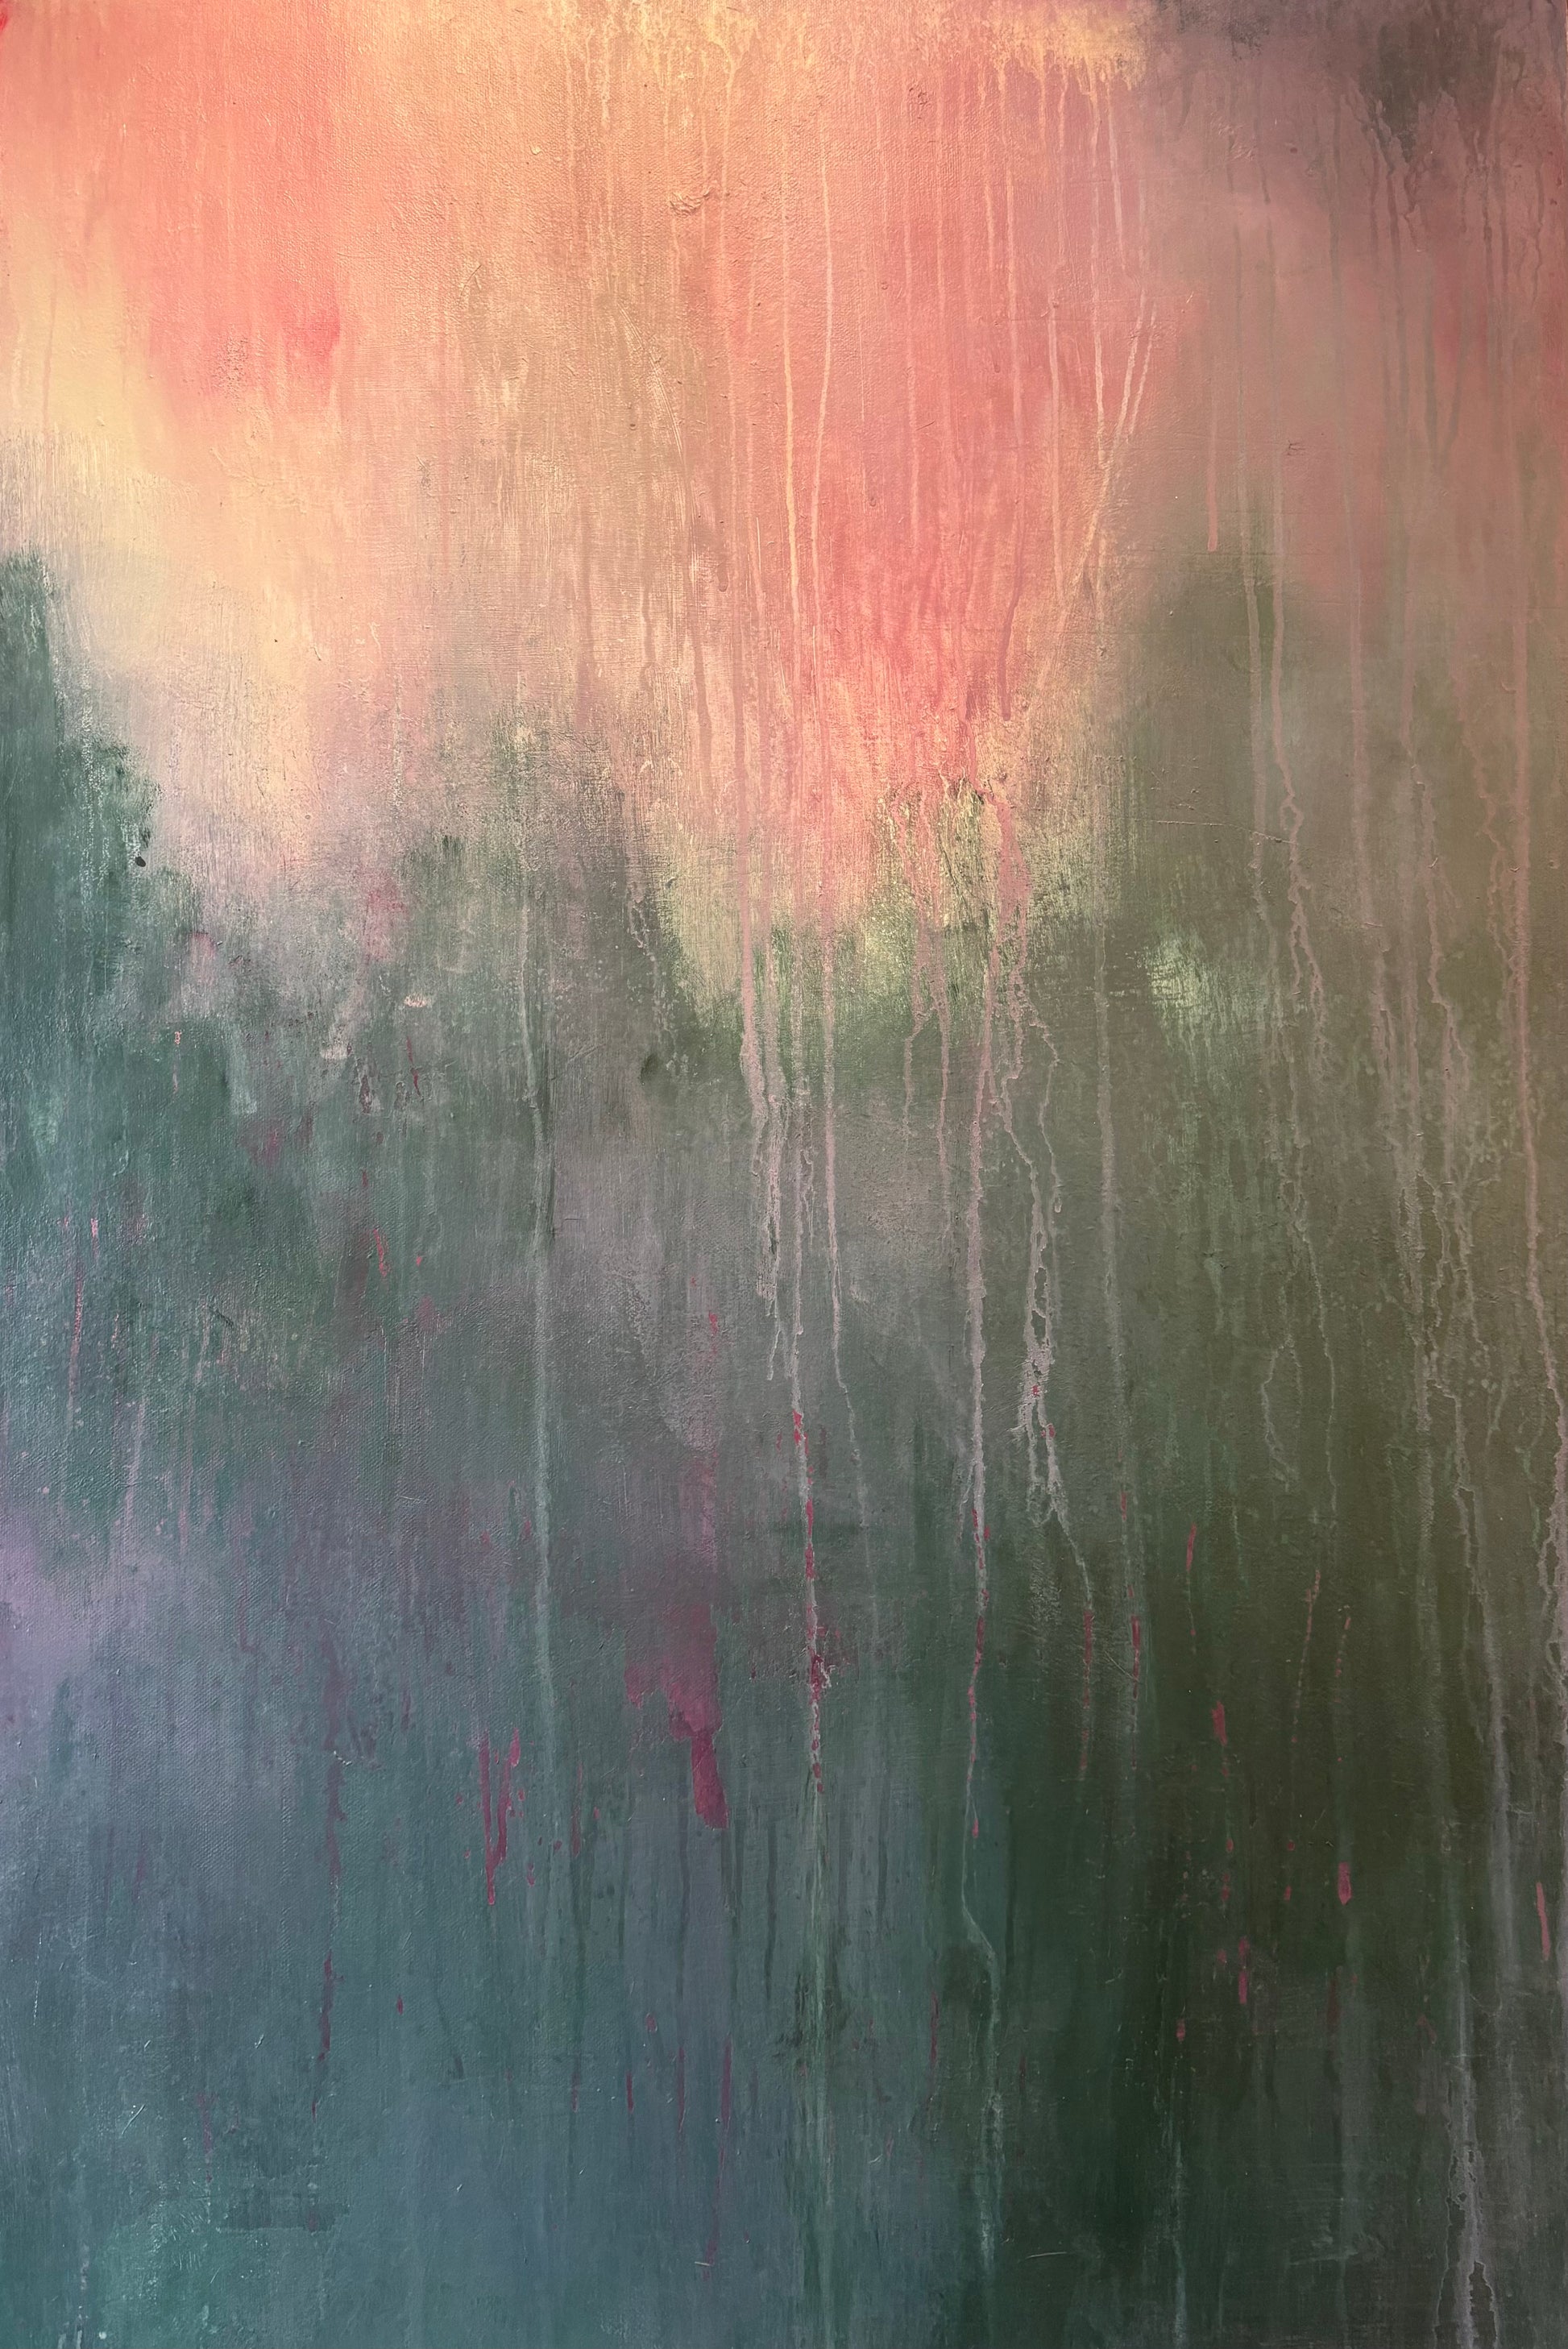 During the rain green and pink abstract contemporary landscape painting art